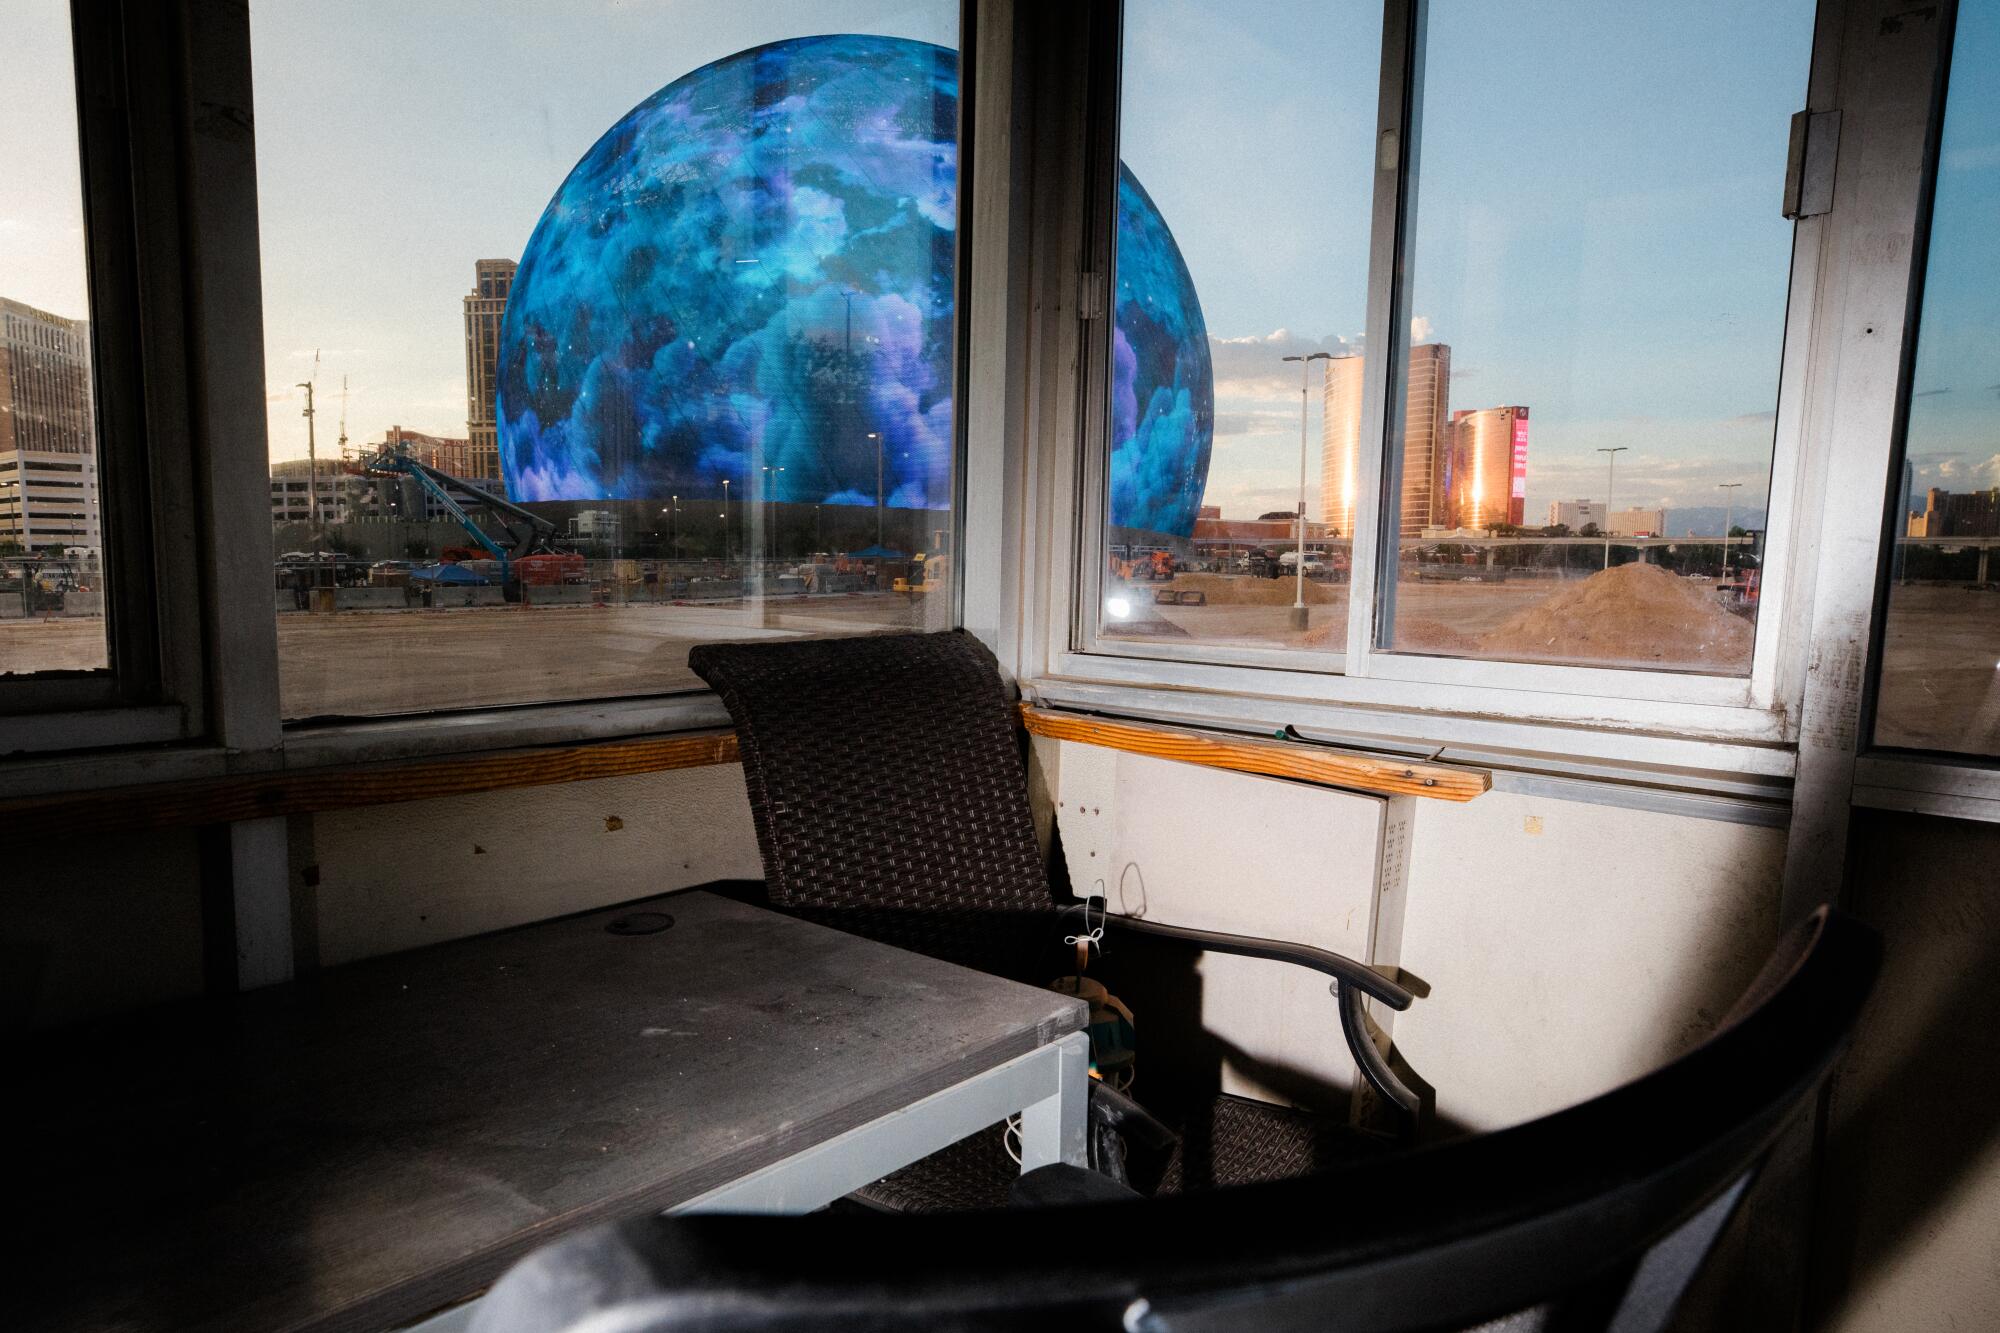 A spherical building whose surface features a bubbling blue cosmic pattern is seen through a security booth.